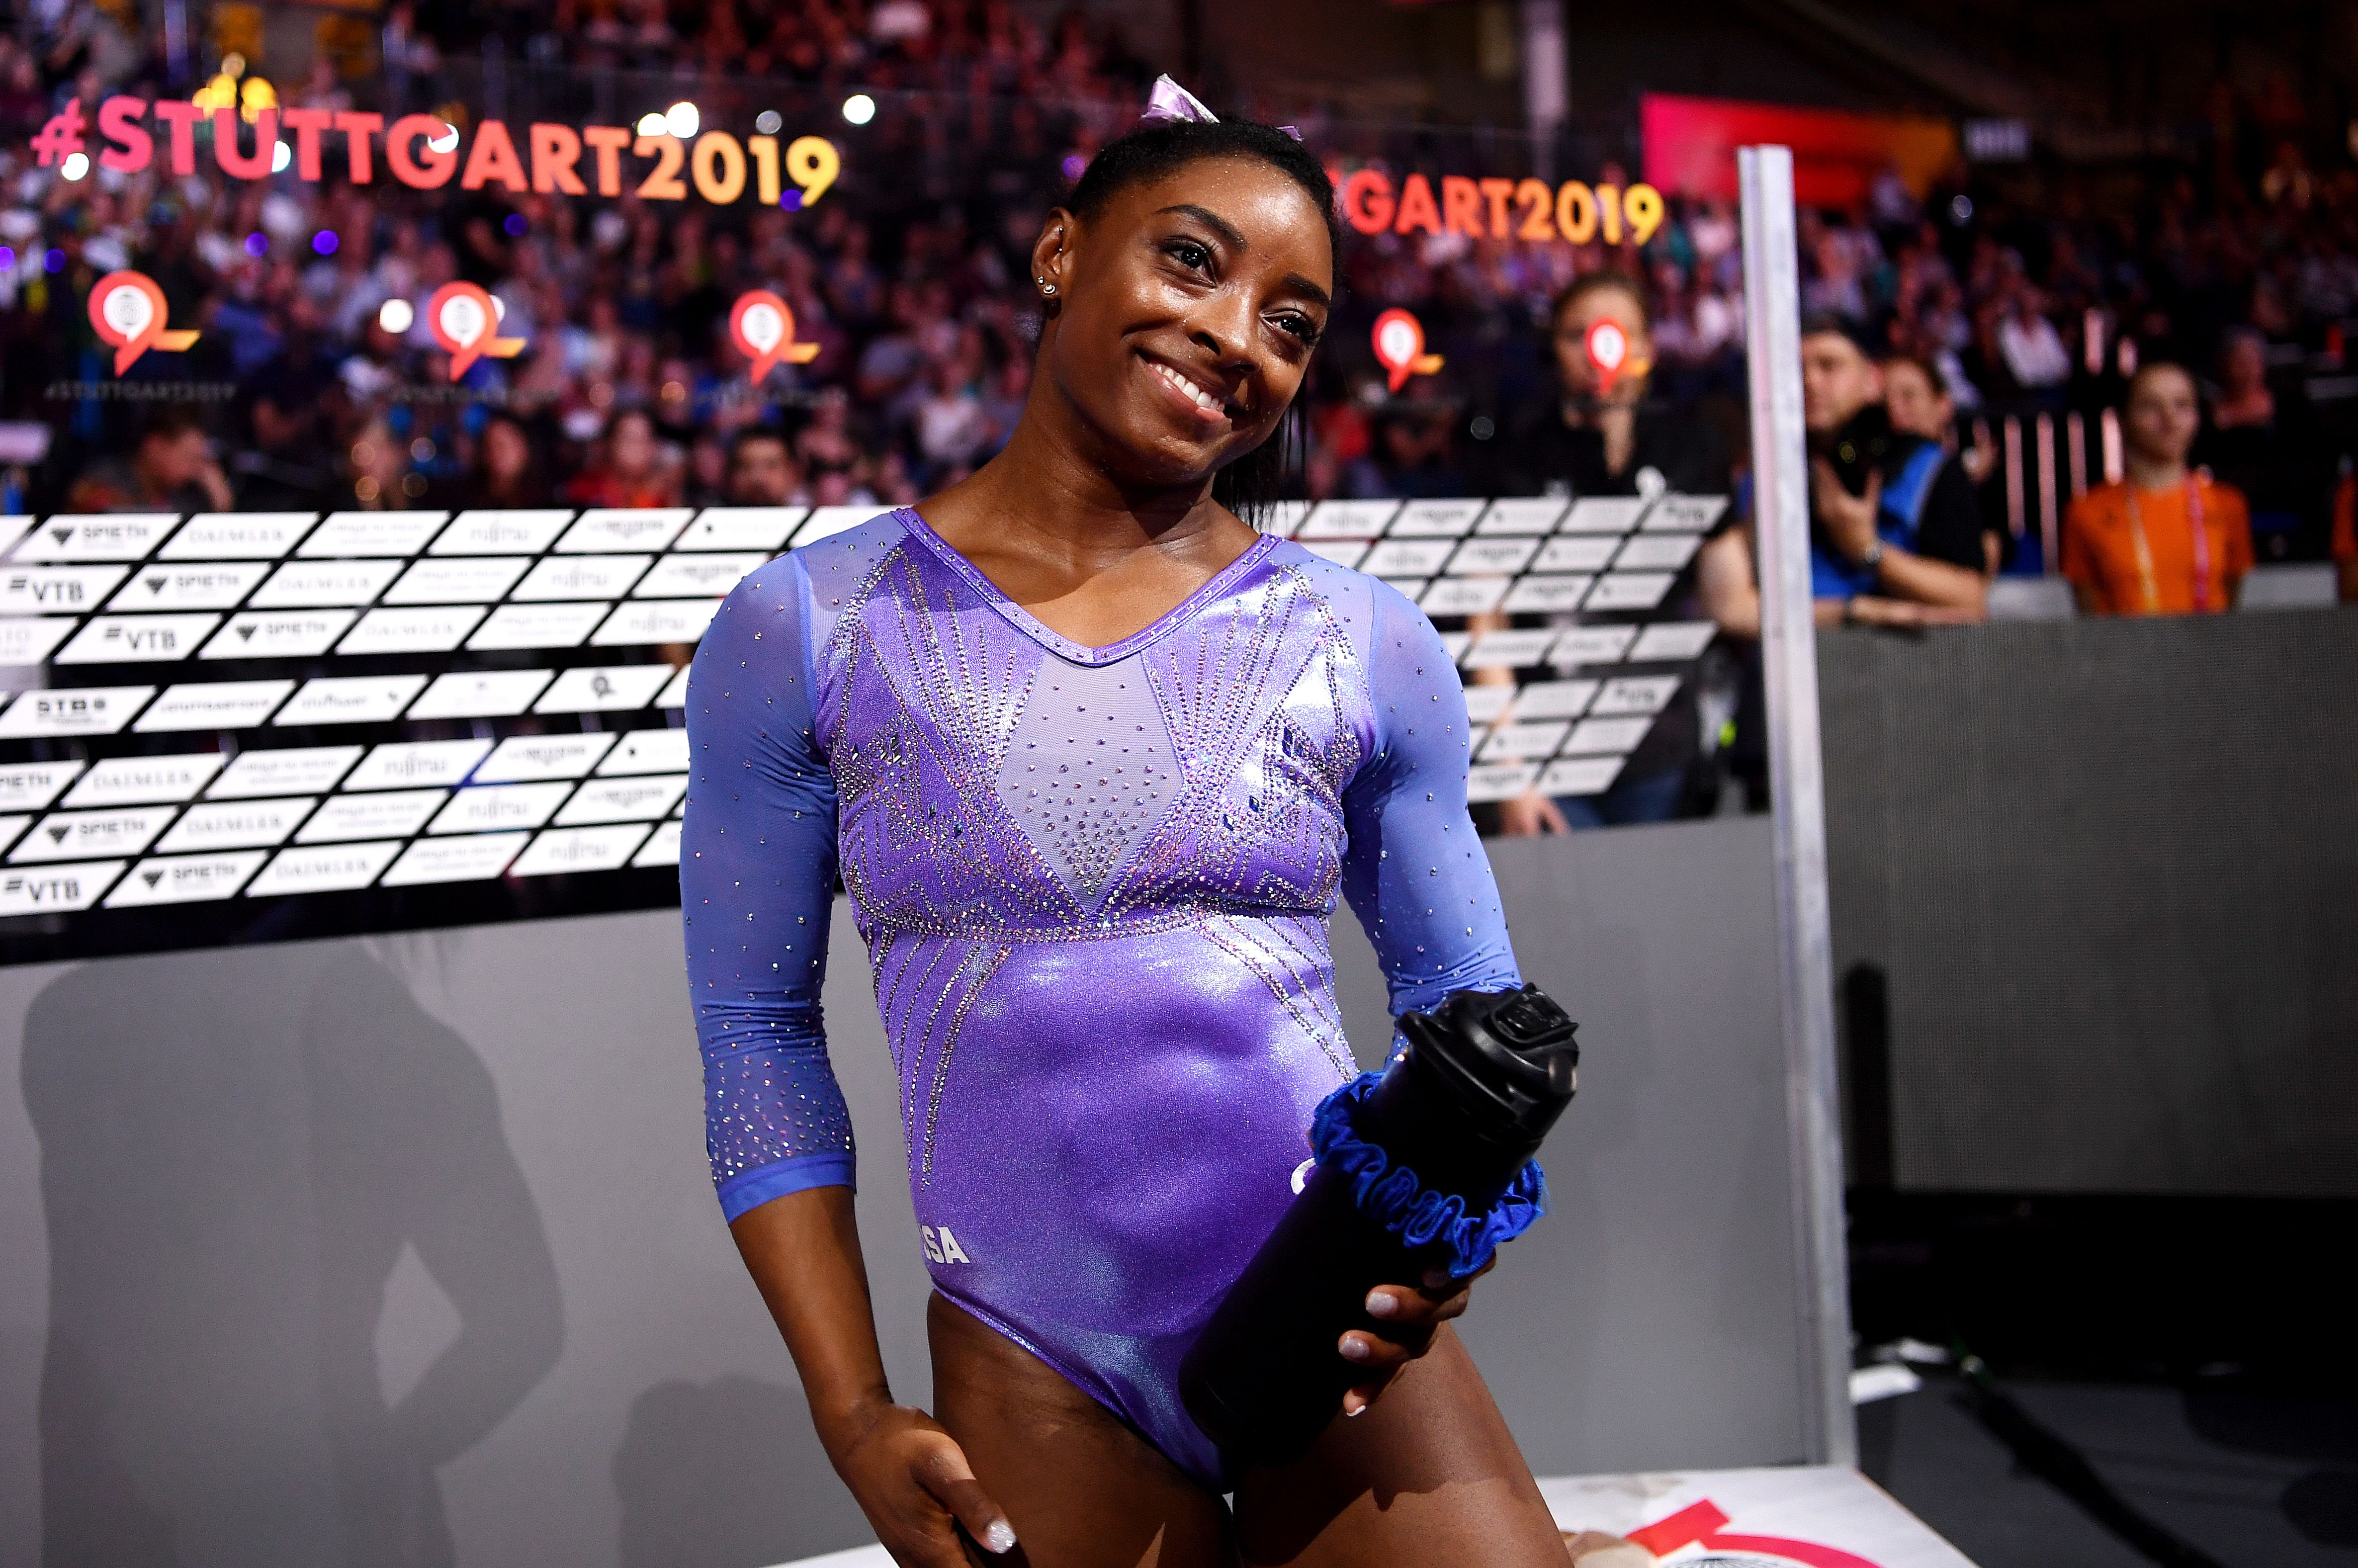 Simone Biles wins gold in the Women's Floor Final during day 10 of the 49th FIG Artistic Gymnastics World Championships at Hanns-Martin-Schleyer-Halle on October 13, 2019 in Stuttgart, Germany. | Source: Getty Images